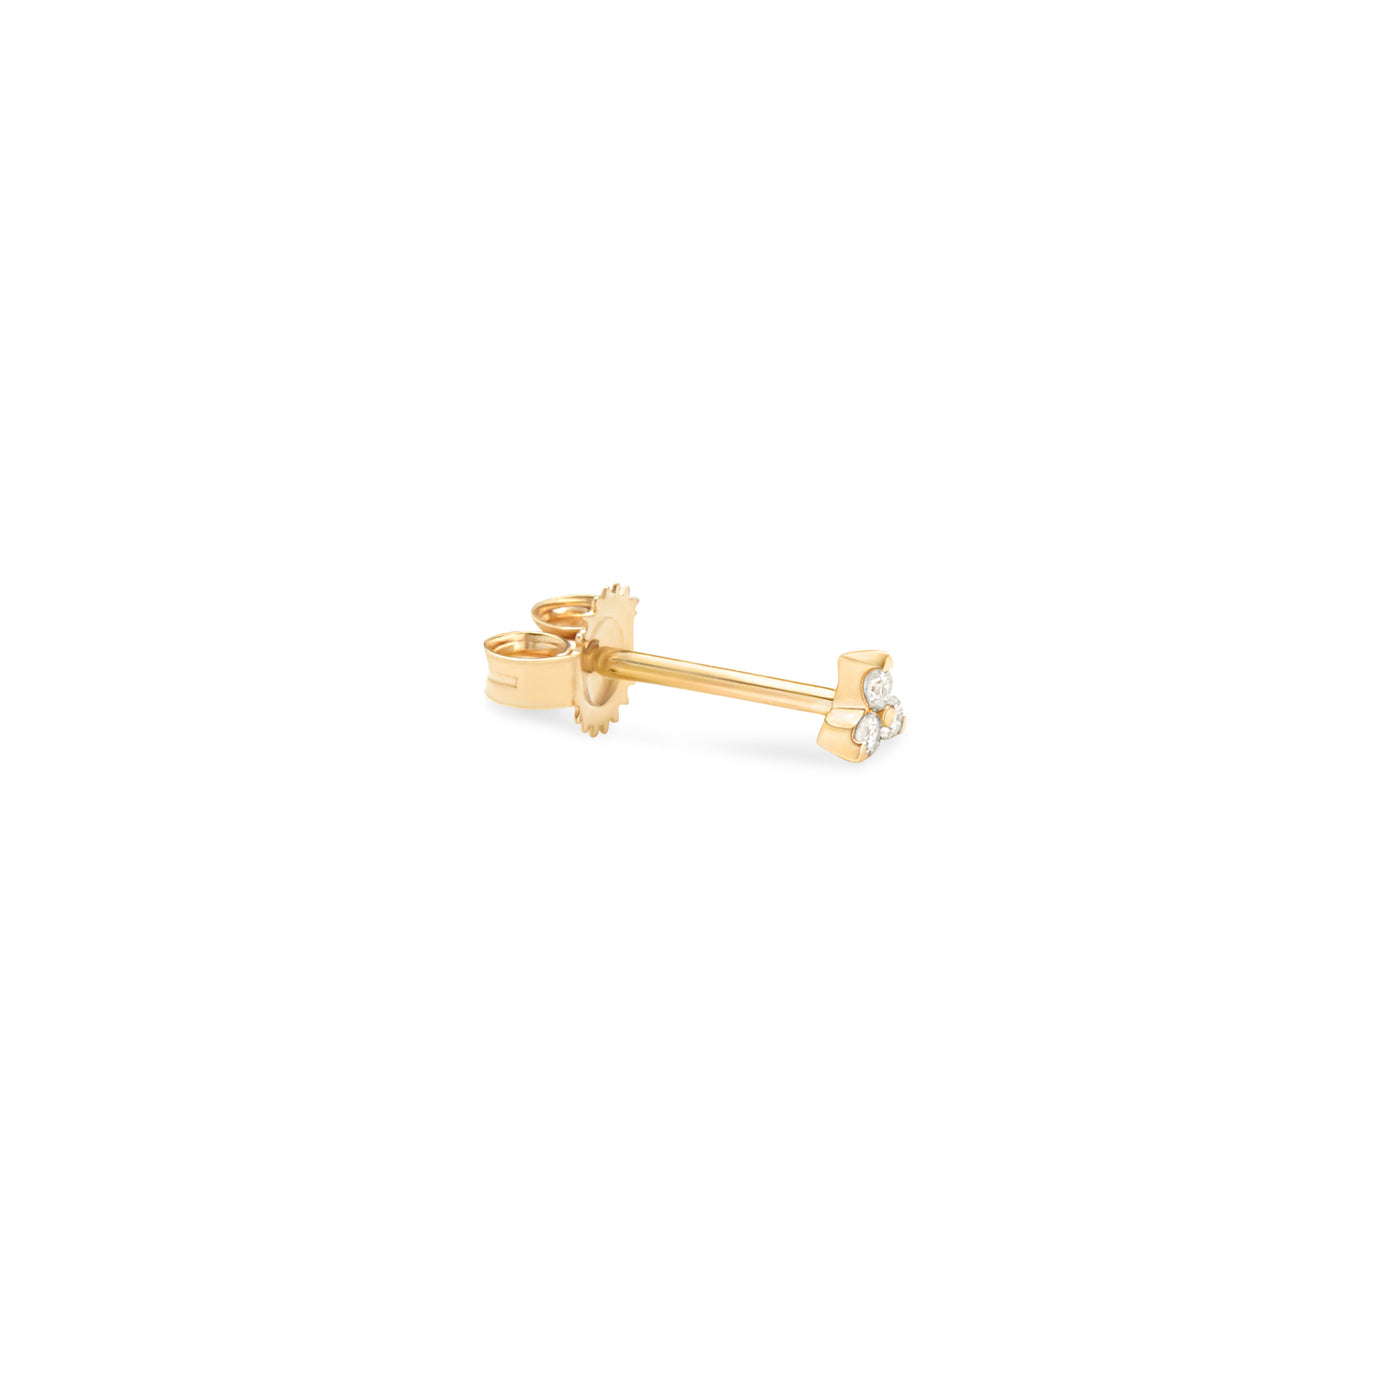 14k Karat yellow gold triangle shape stud with 3 diamonds on white background turned for detail